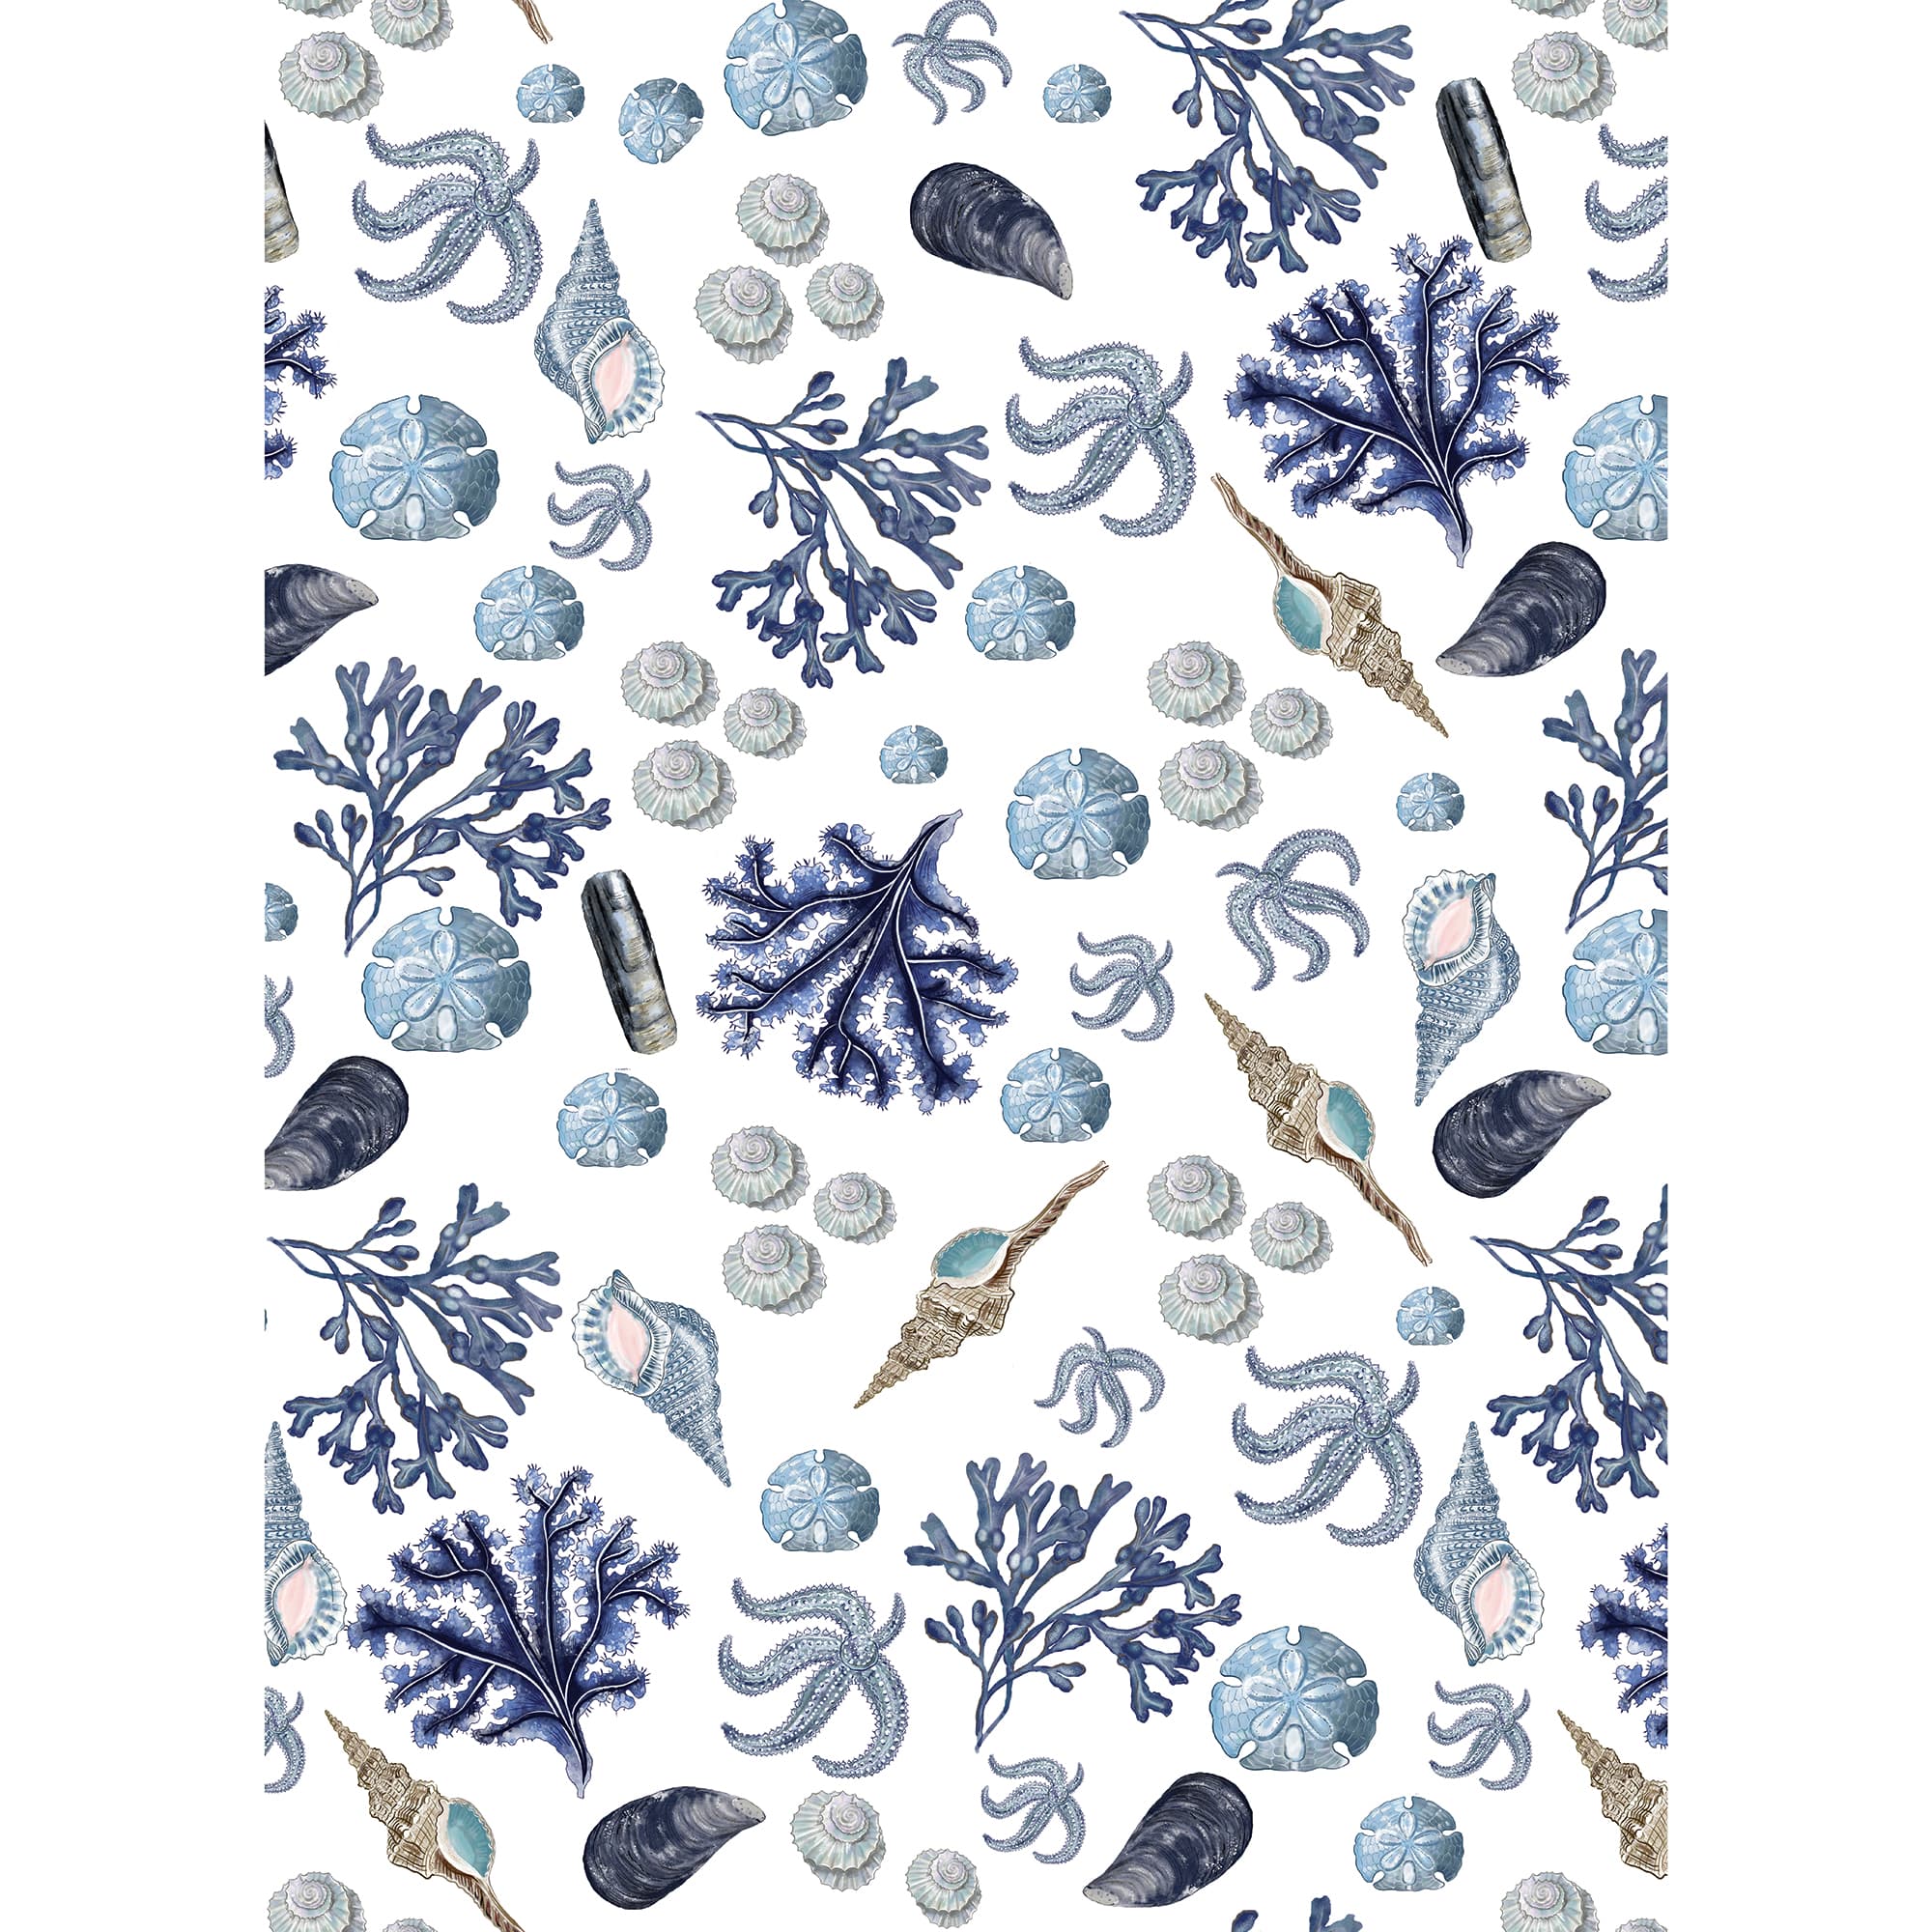 Cotton and Linen  Beachcomber Tea towel decorated with seashells,sand dollars,mussel shell and seaweed hand drawn designs in shades of blue on a white background